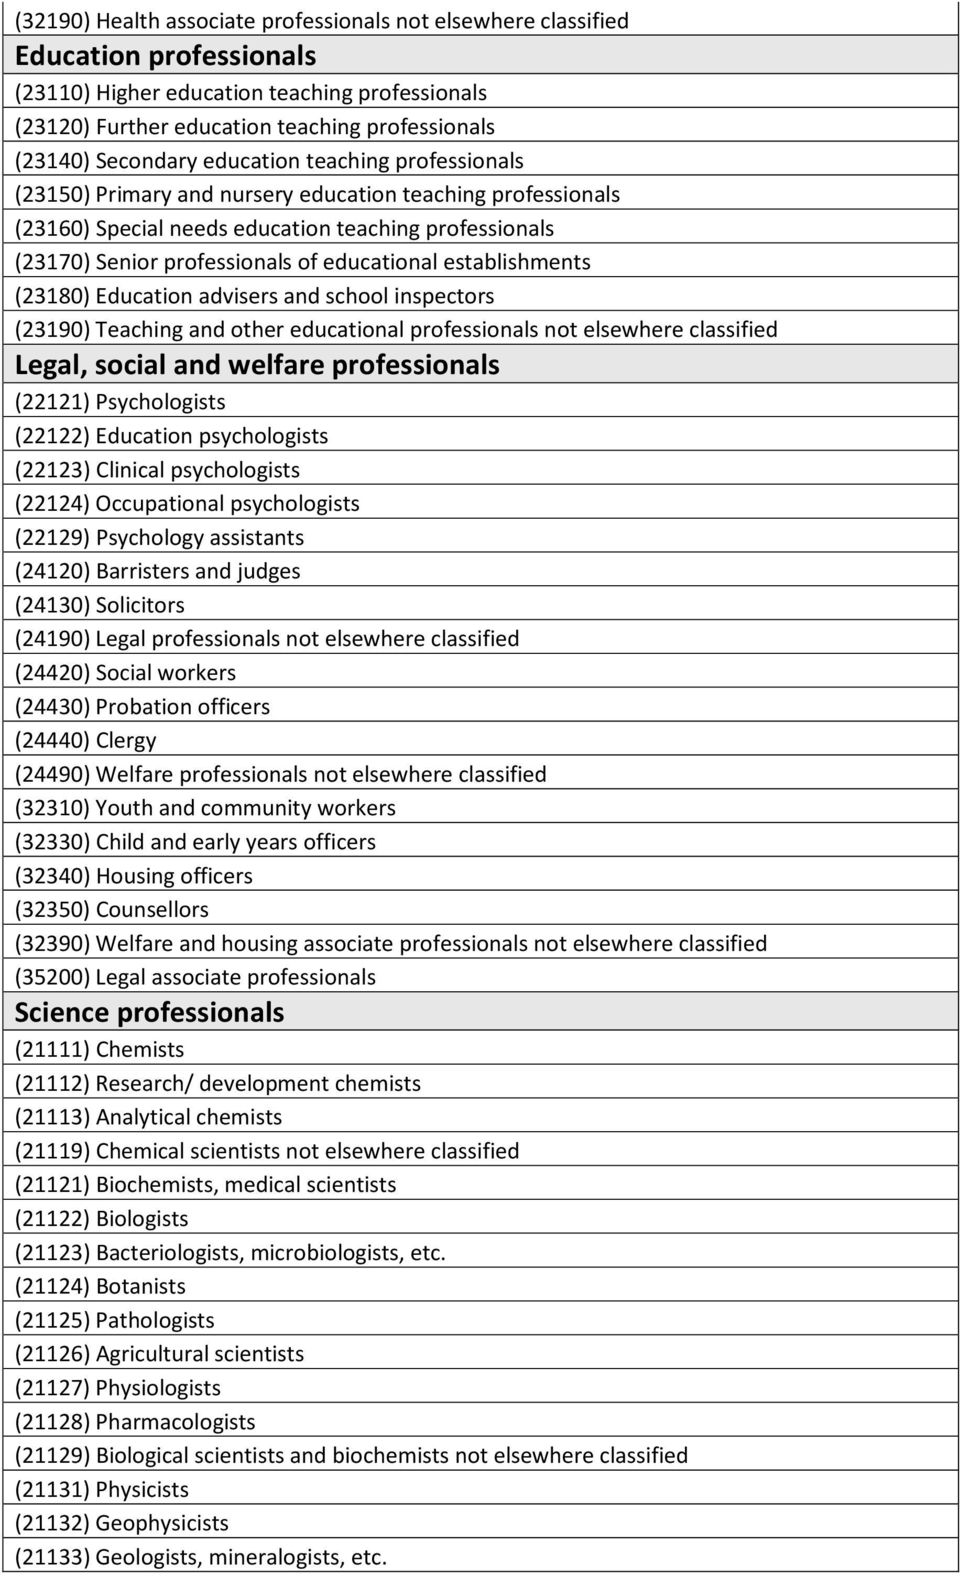 educational establishments (23180) Education advisers and school inspectors (23190) Teaching and other educational professionals not elsewhere classified Legal, social and welfare professionals